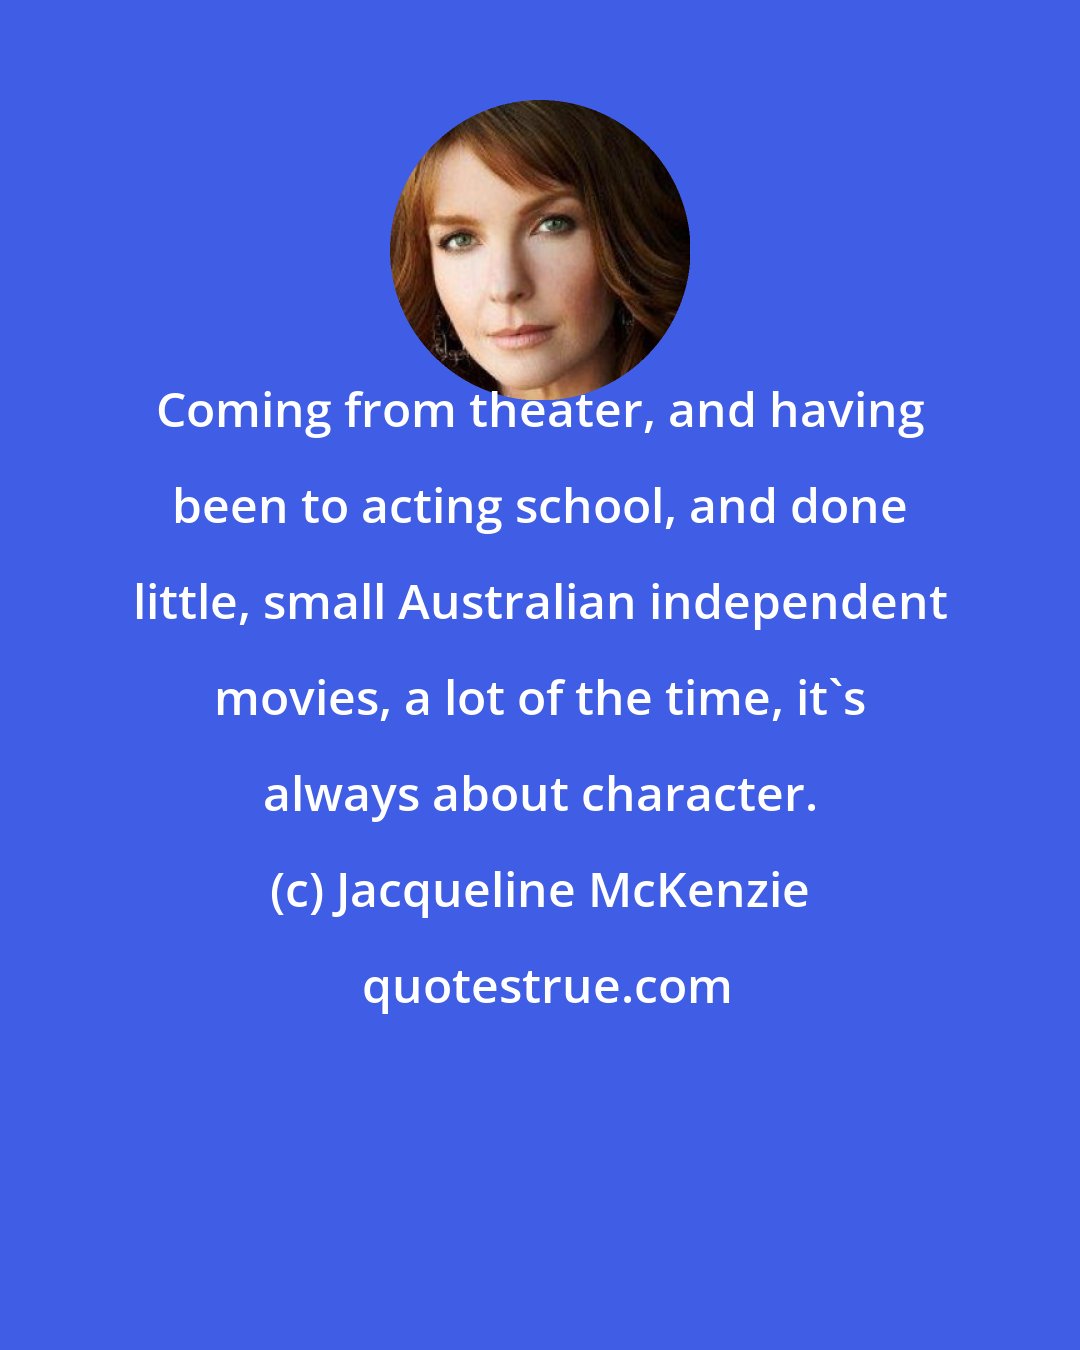 Jacqueline McKenzie: Coming from theater, and having been to acting school, and done little, small Australian independent movies, a lot of the time, it's always about character.